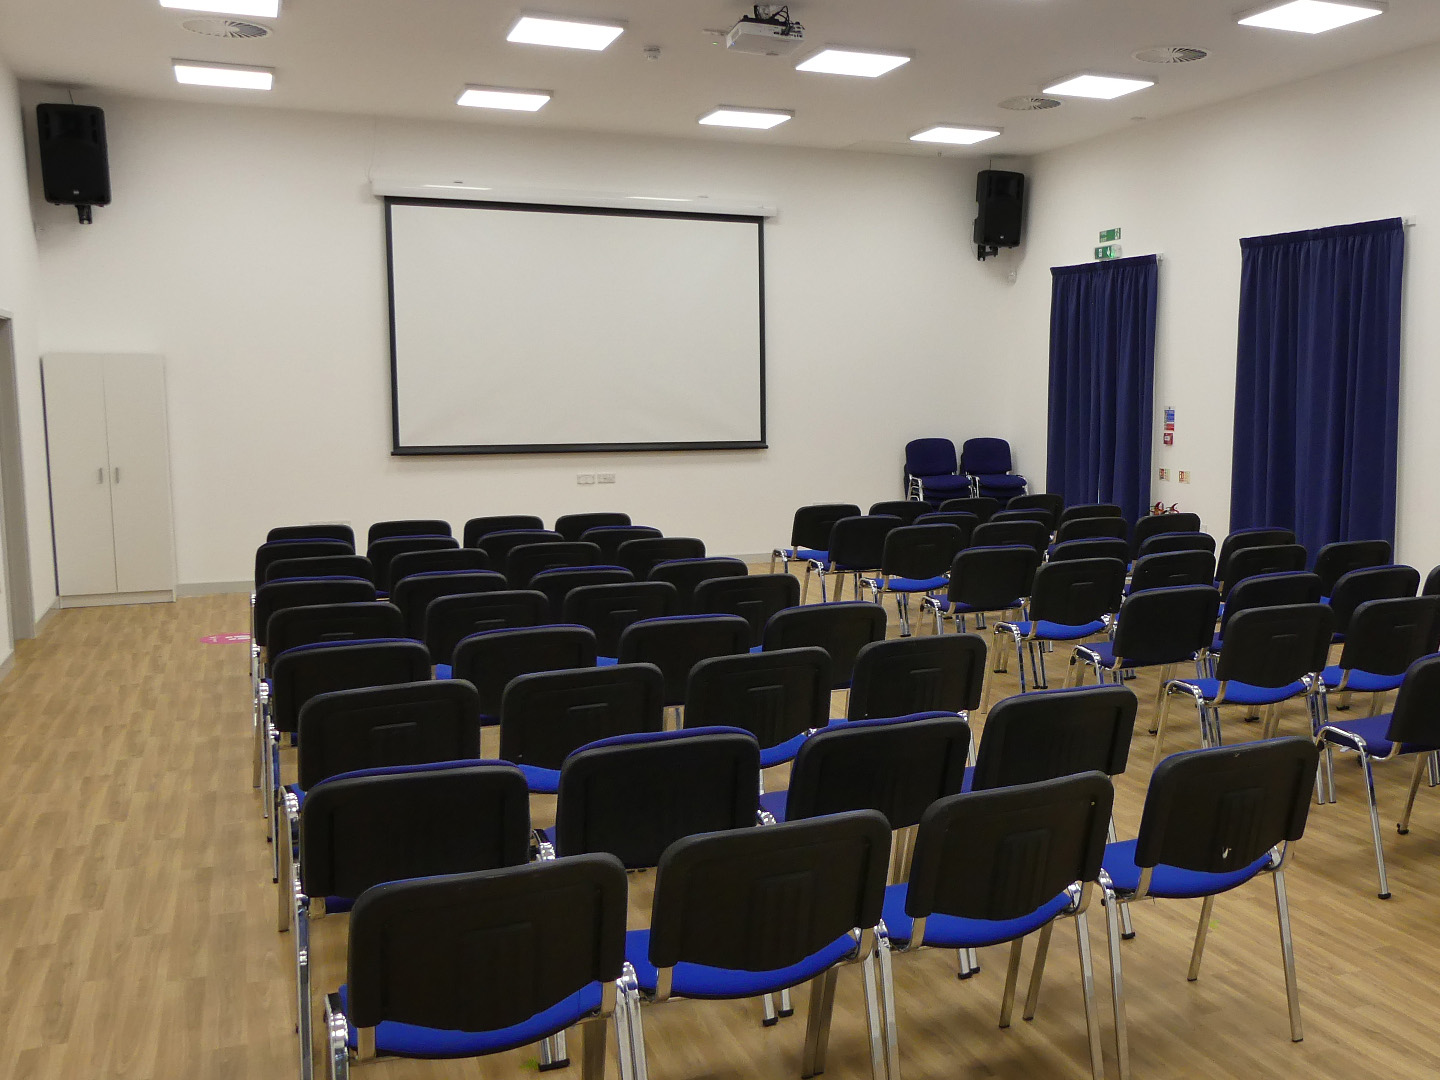 Projector and screen in village hall installation